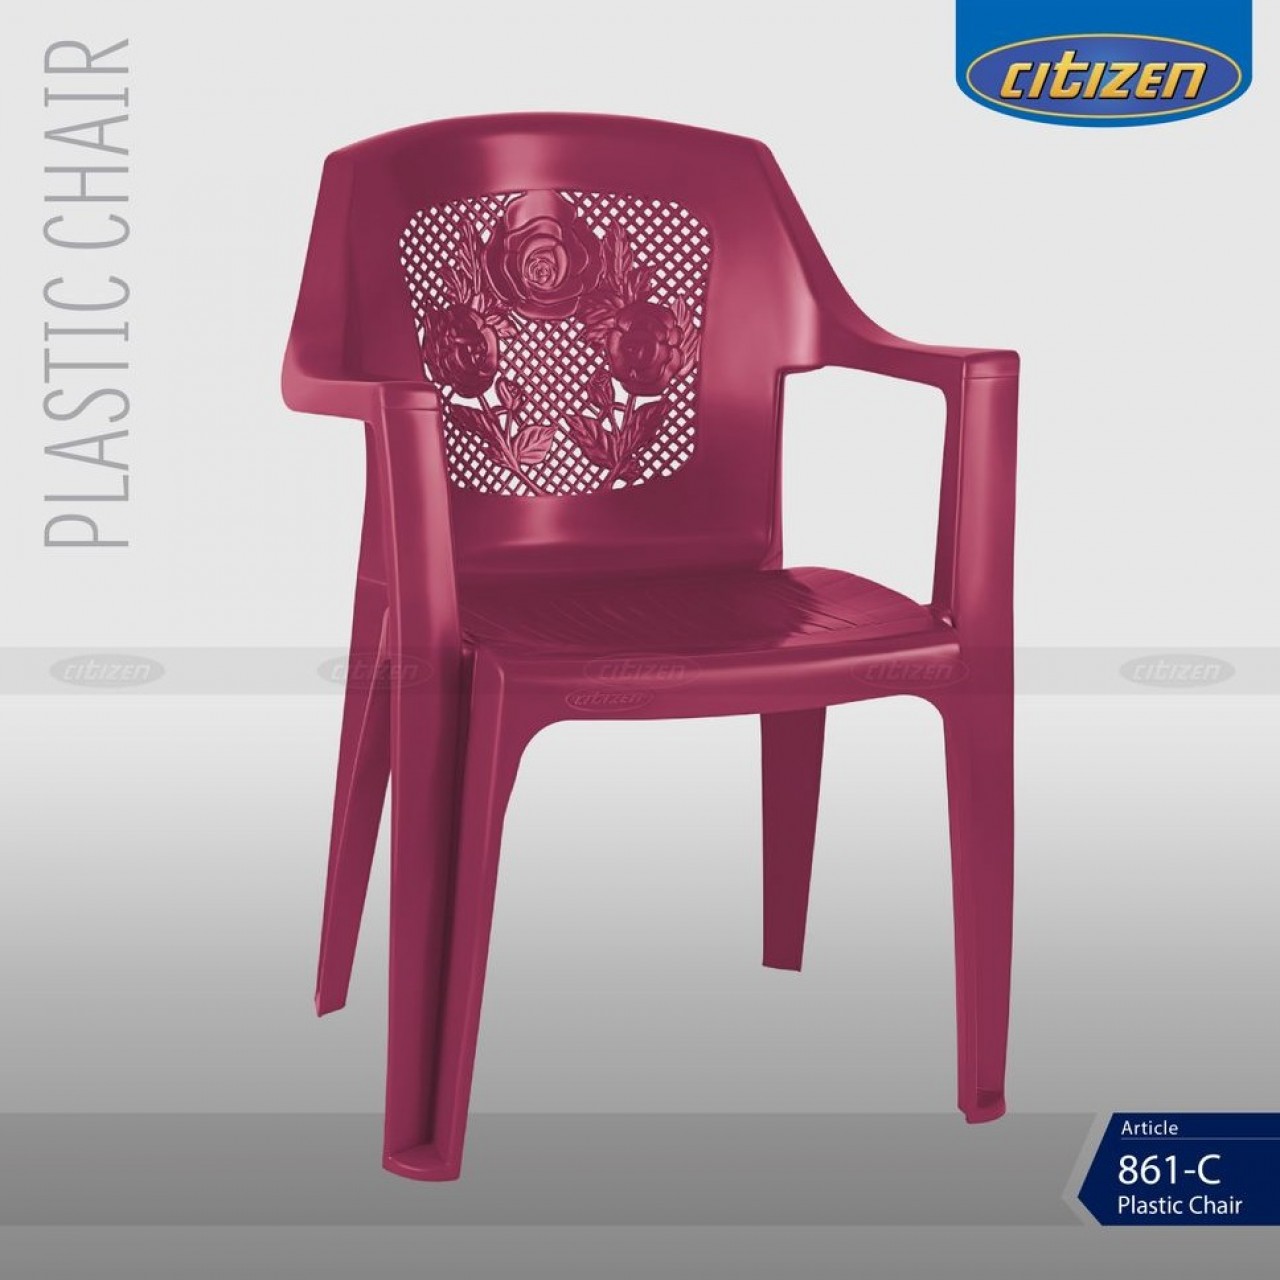 Citizen 861-C Full Plastic Regular Chair With Arms